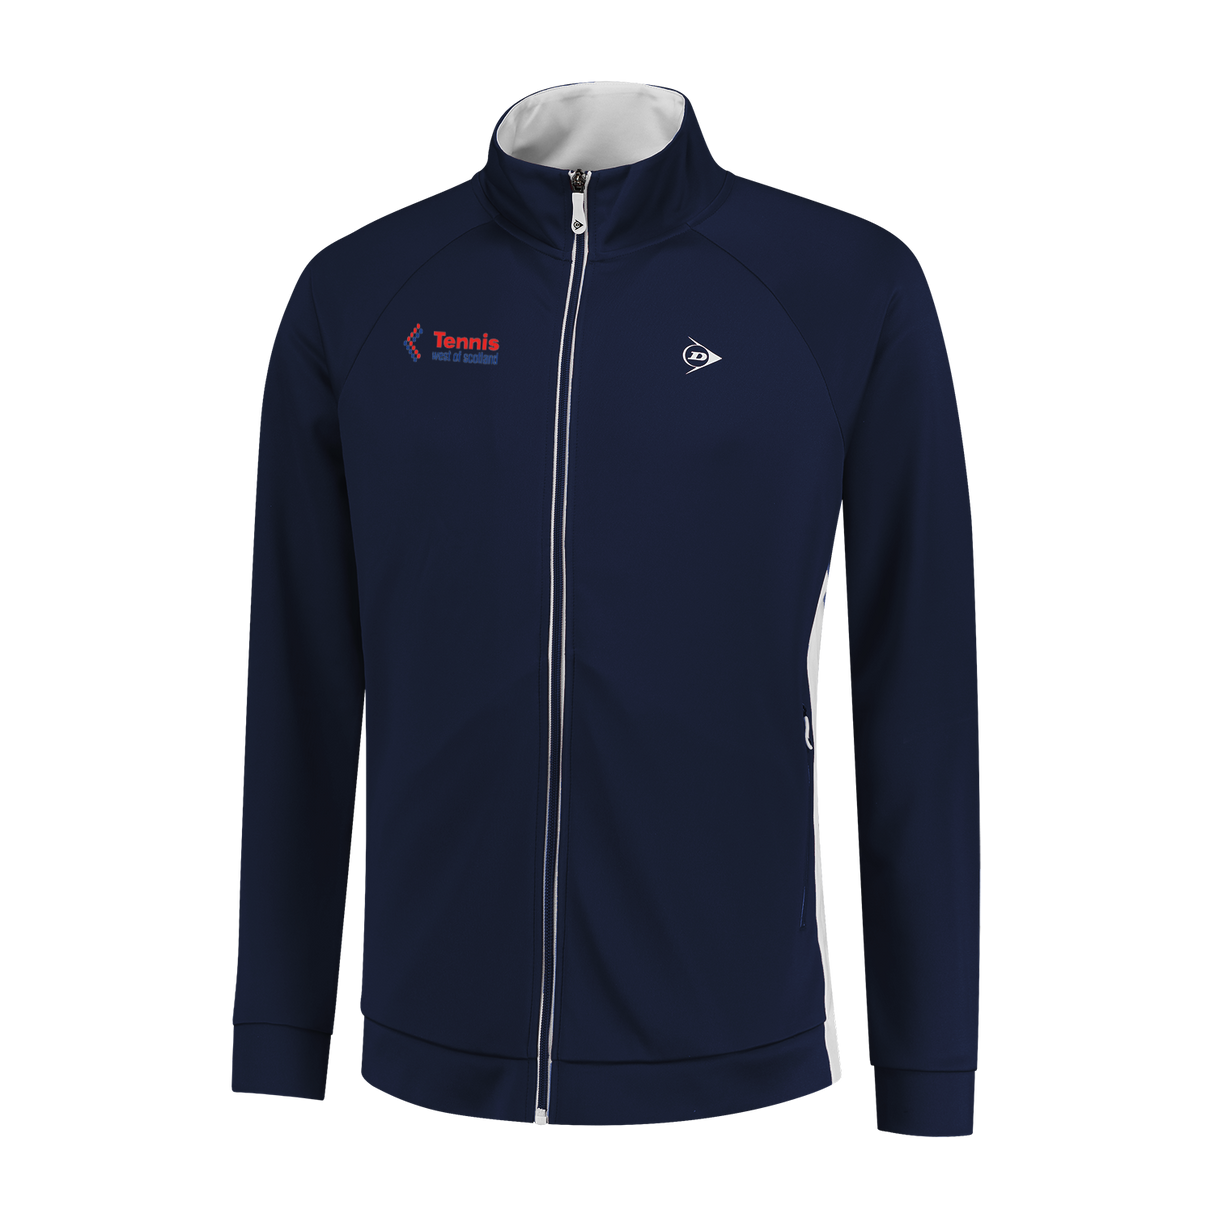 Dunlop West of Scotland Club Knitted Jacket (Mens) - Navy